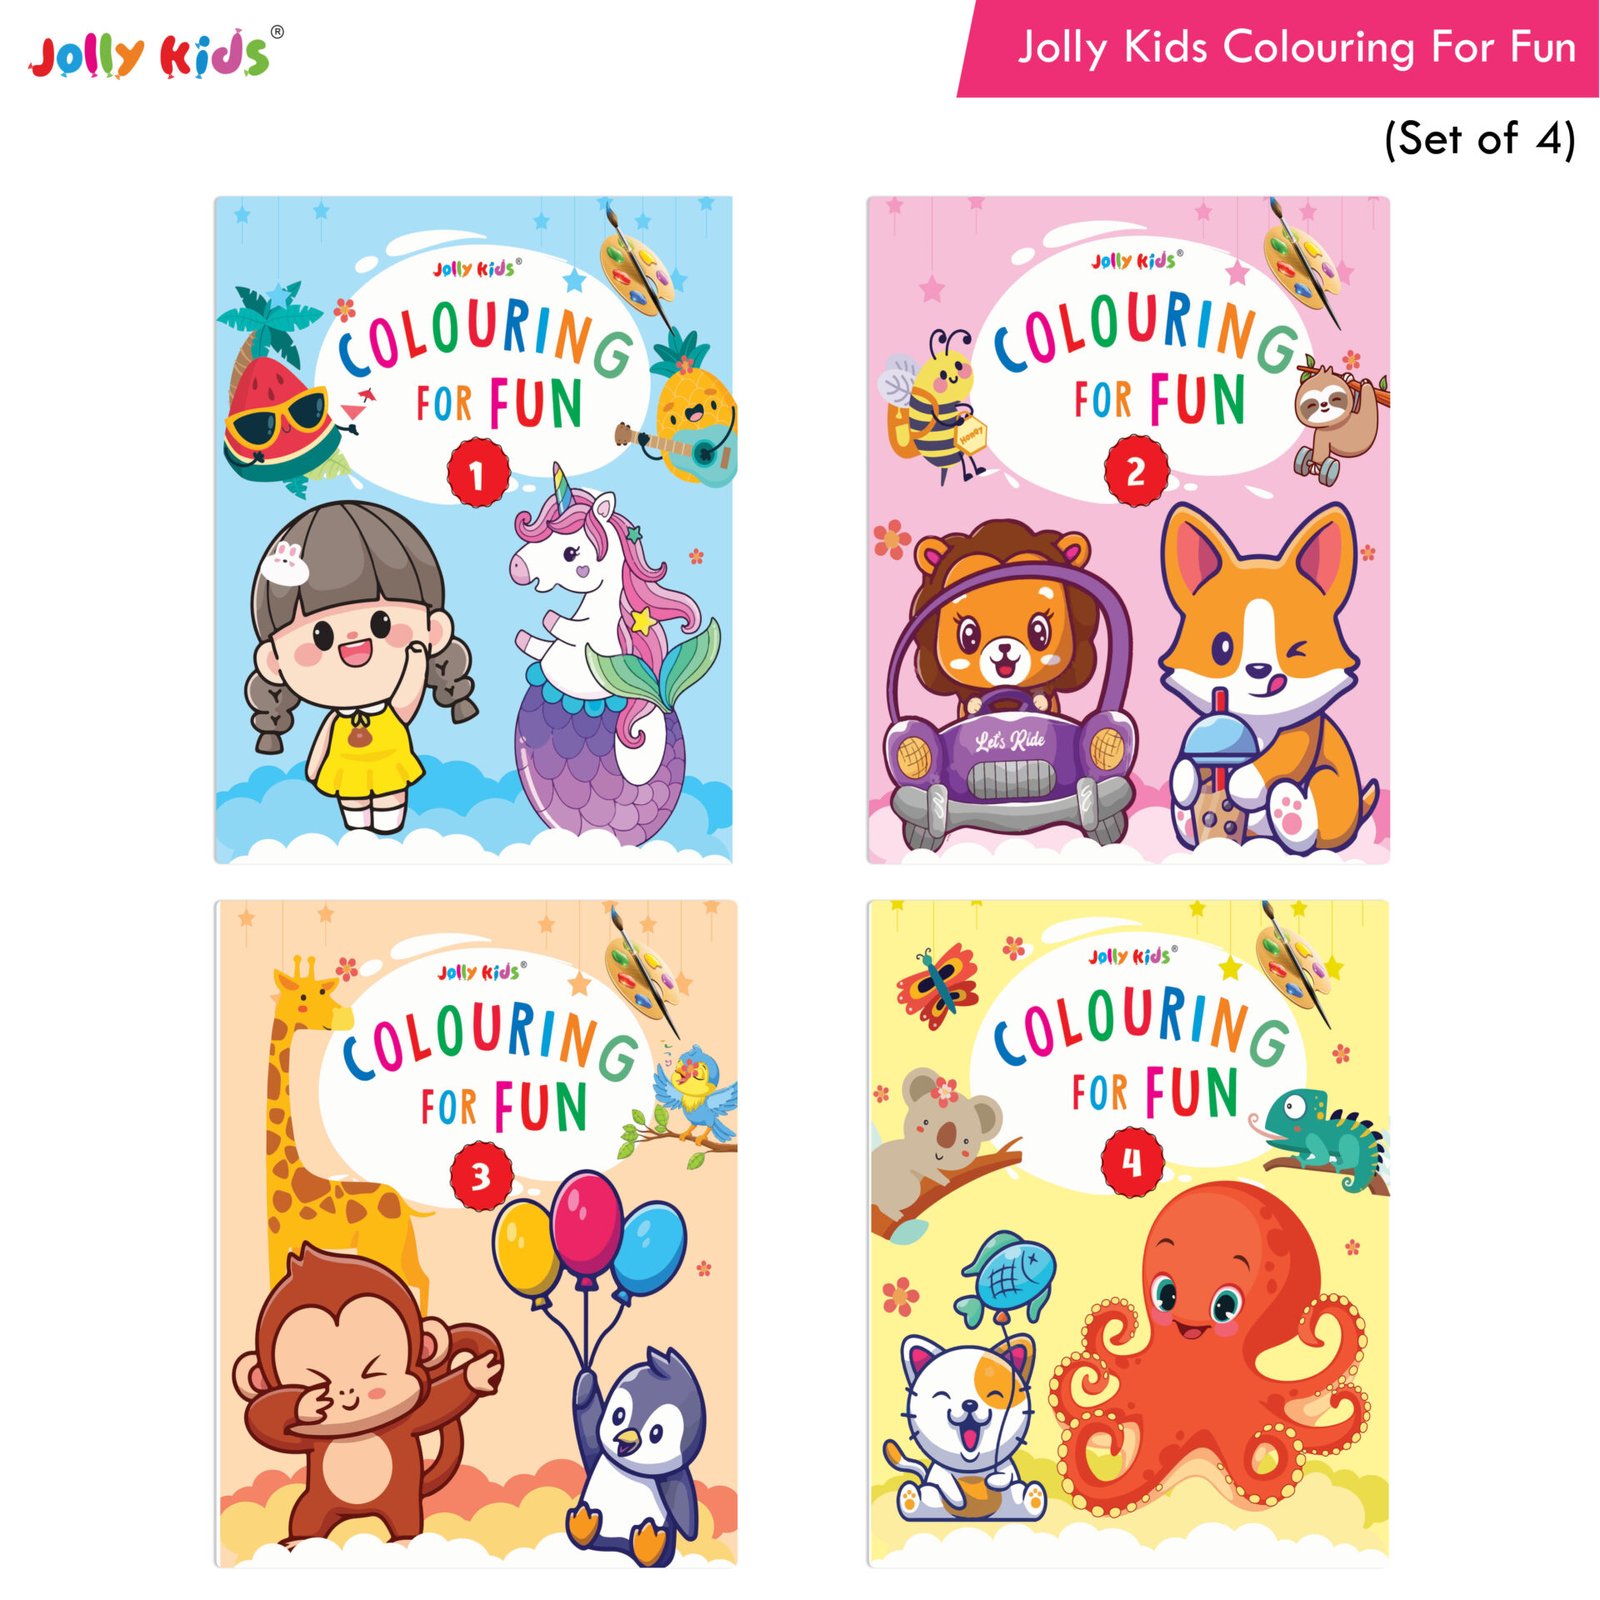 Jolly Kids Colouring For Fun Book Set of 4 1 4 1